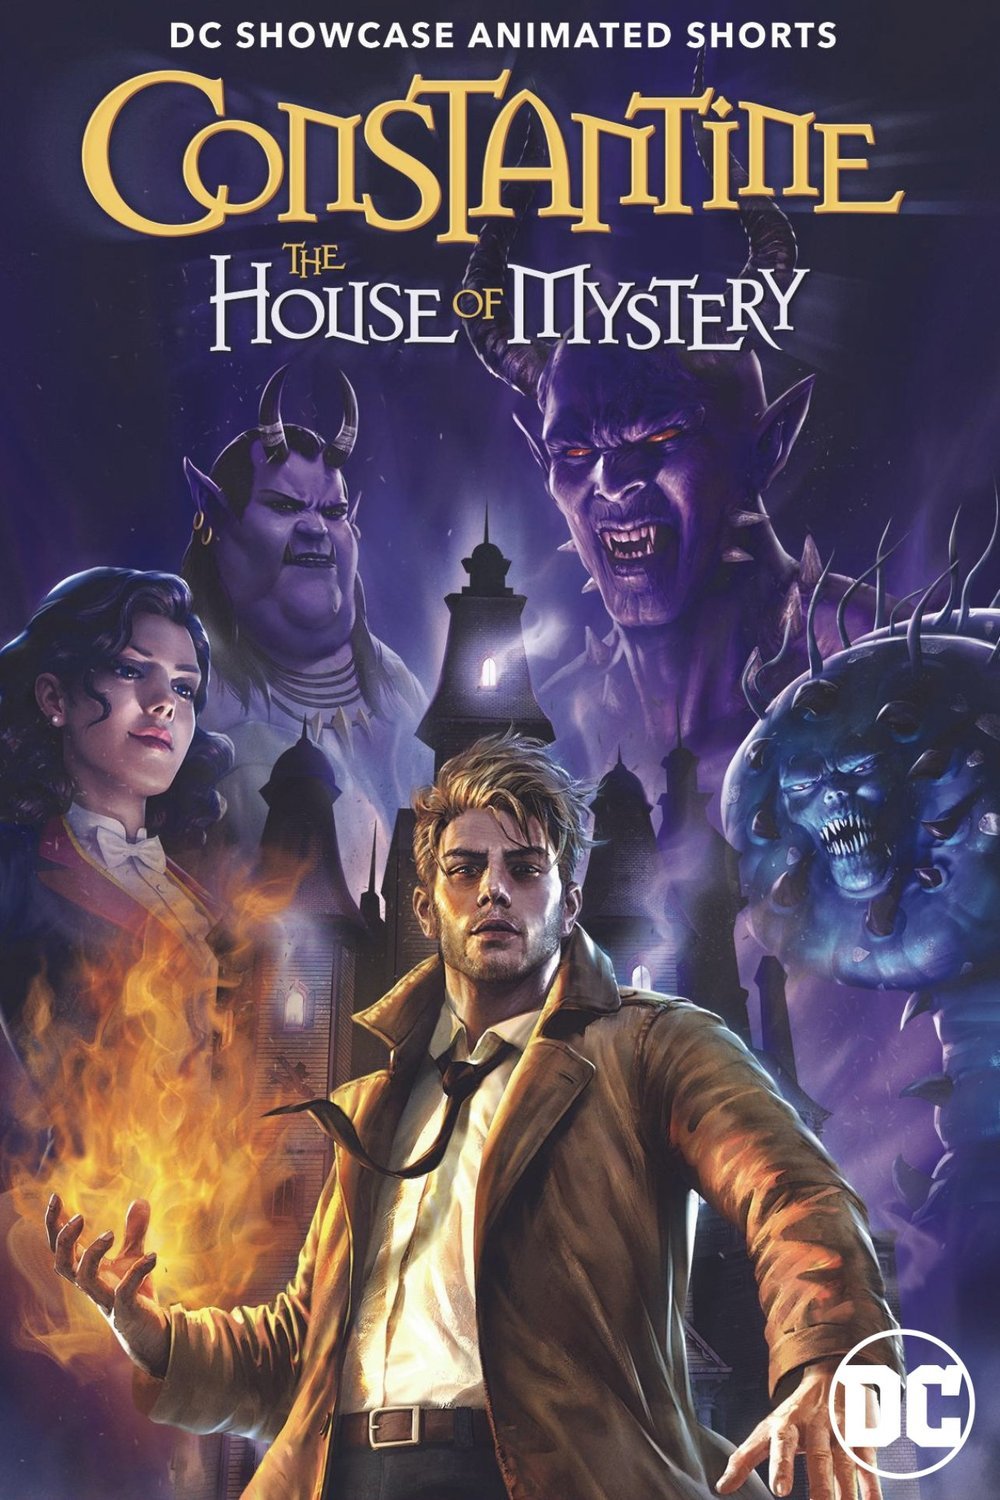 L'affiche du film DC Showcase: Constantine - The House of Mystery